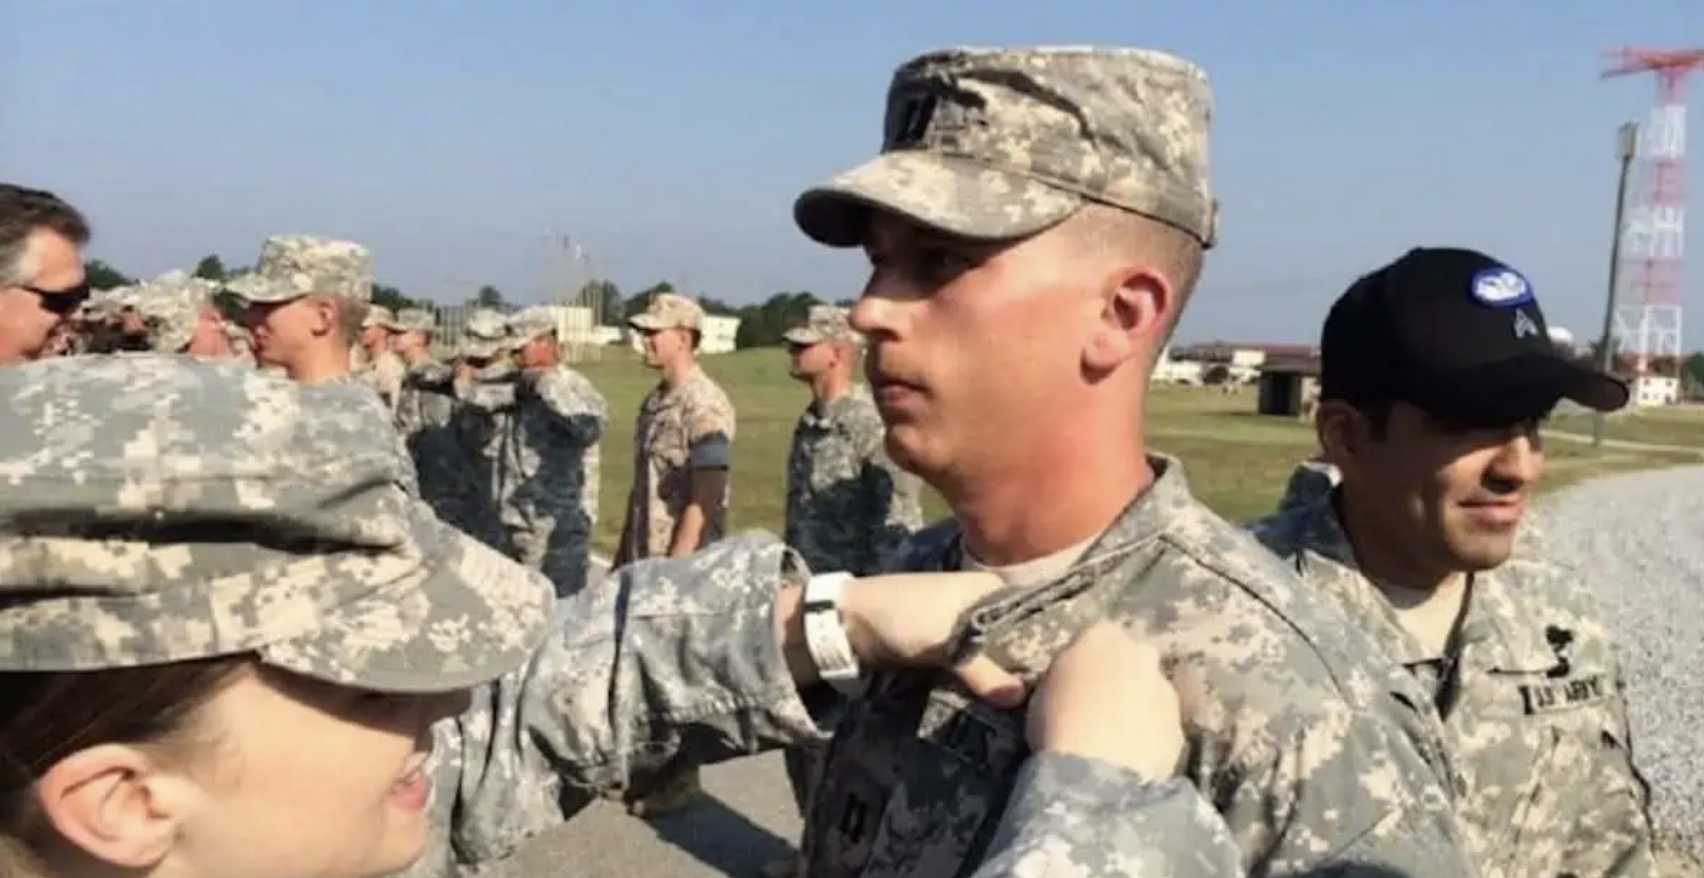 Thumbnail from America Out Loud Pulse post with military personnel getting award